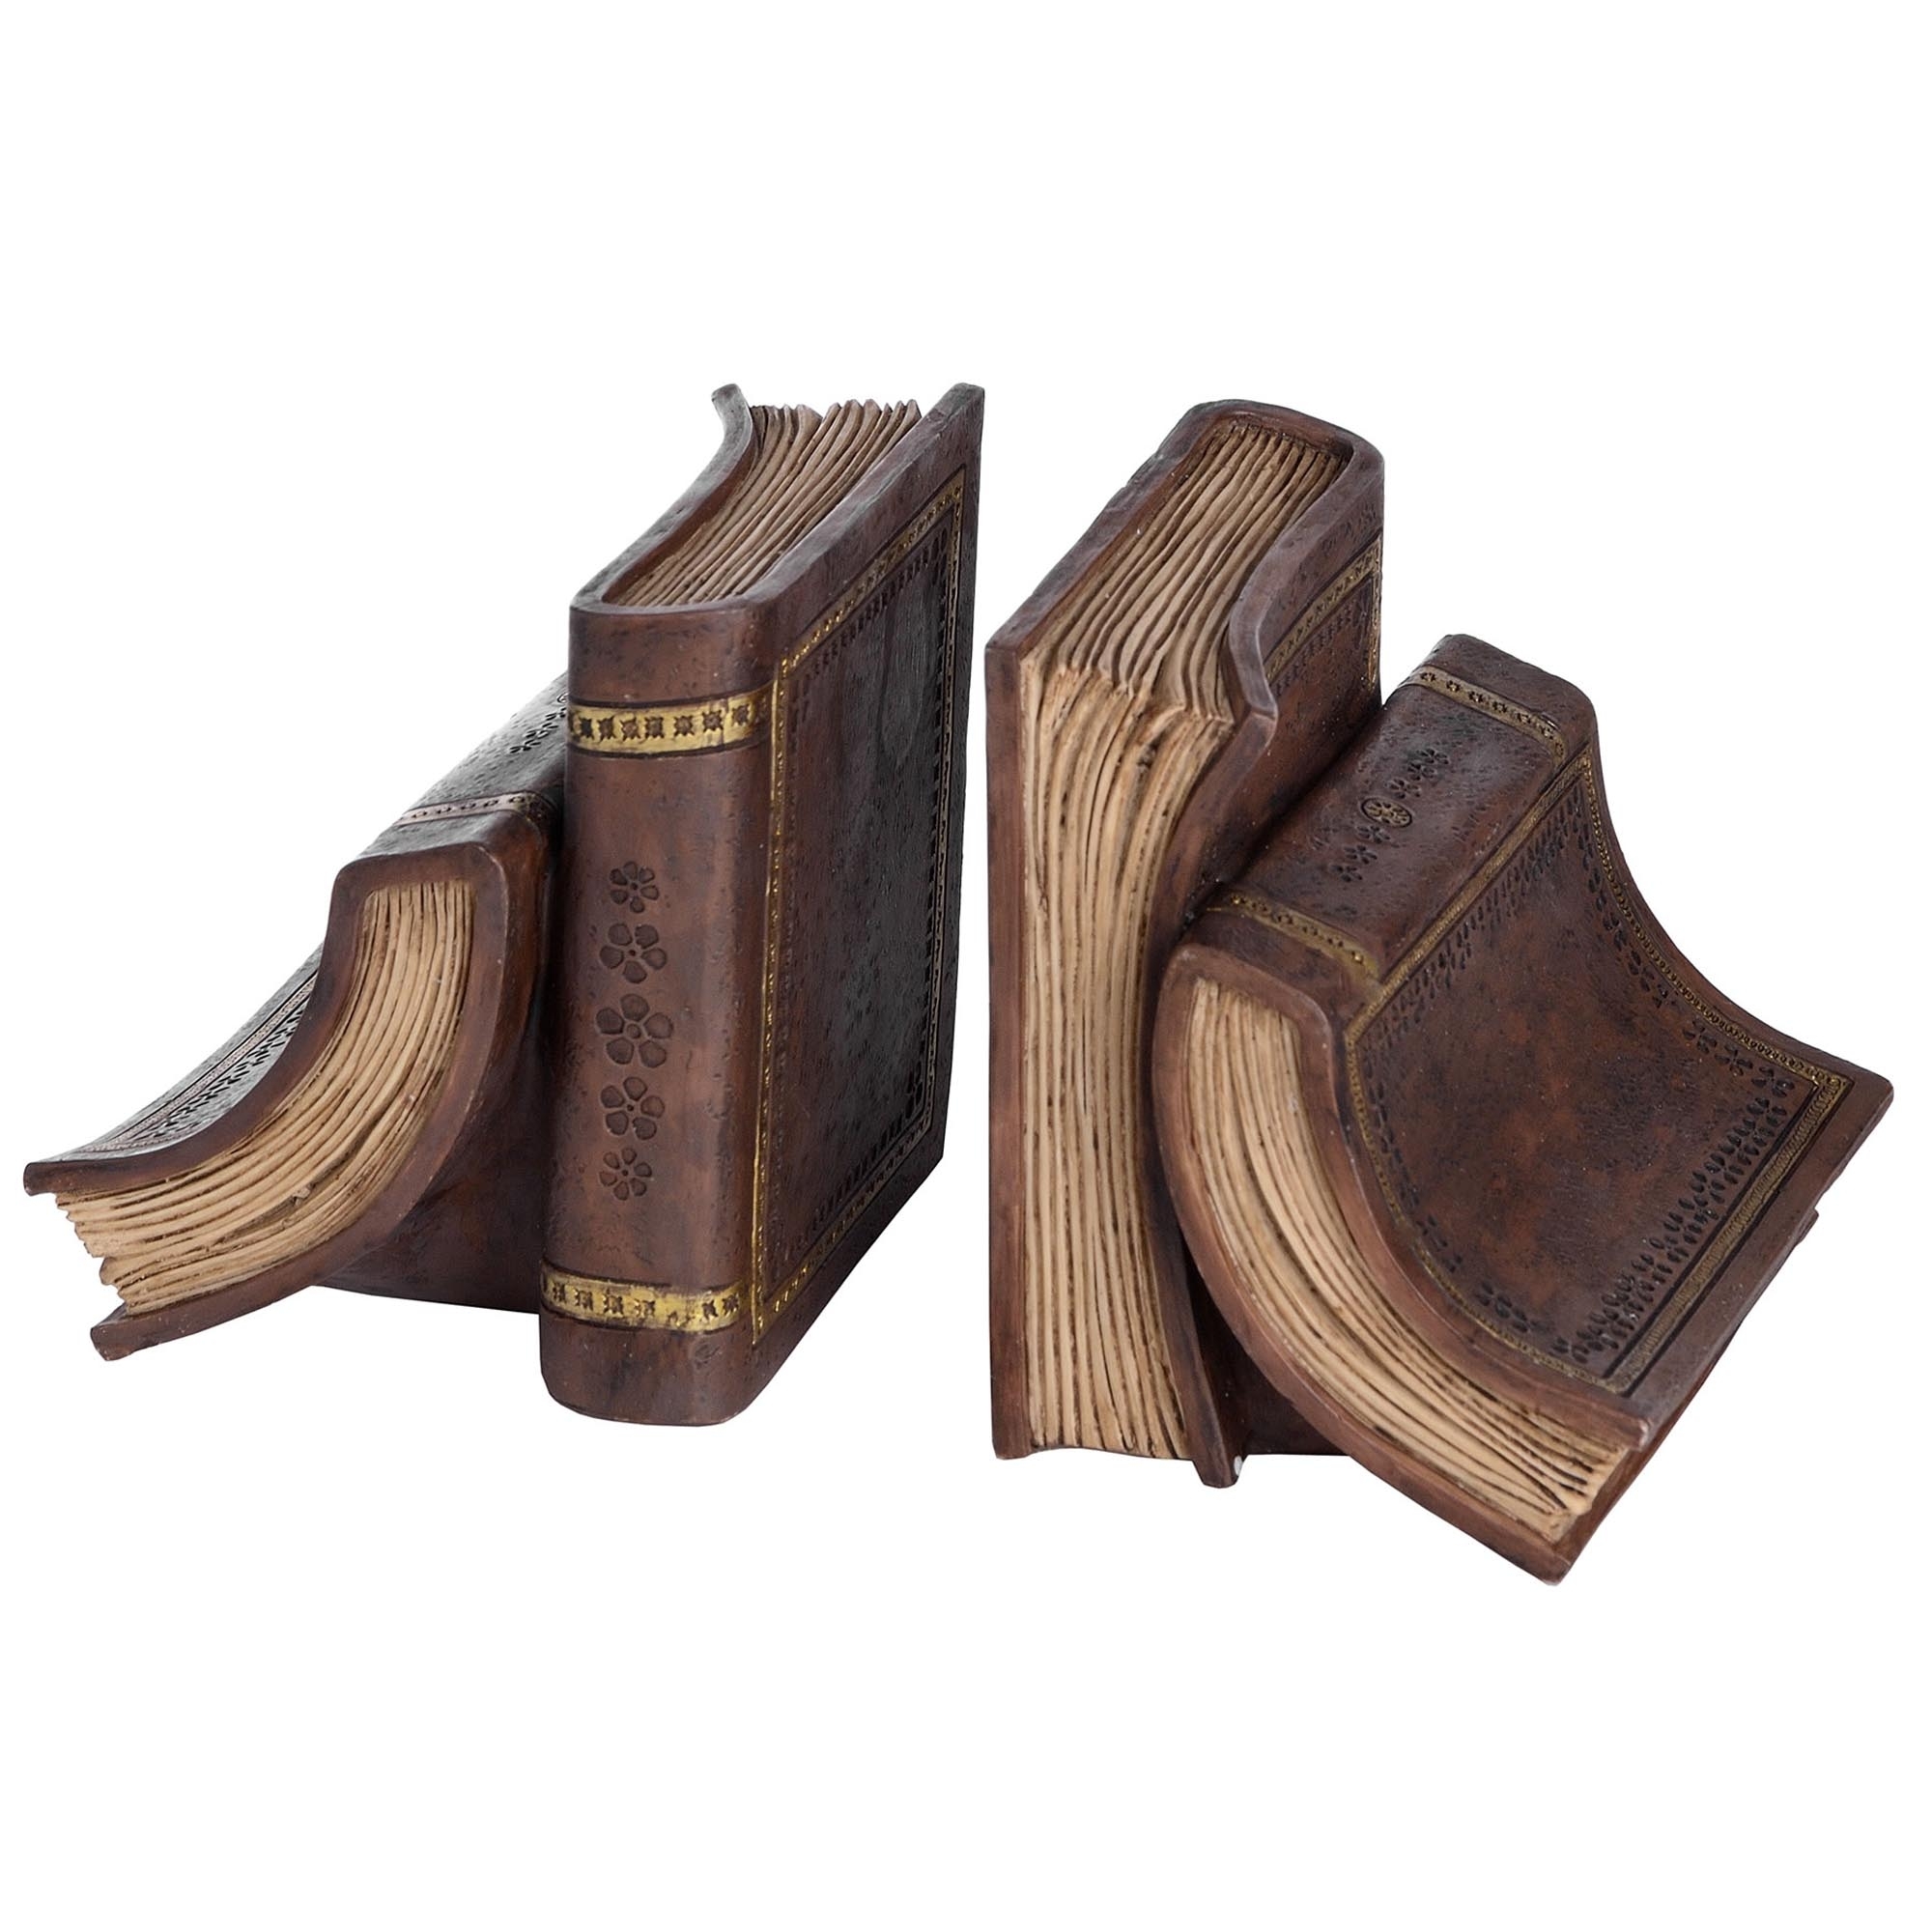 Pair of Old Books Bookends | Bookends | HomesDirect365